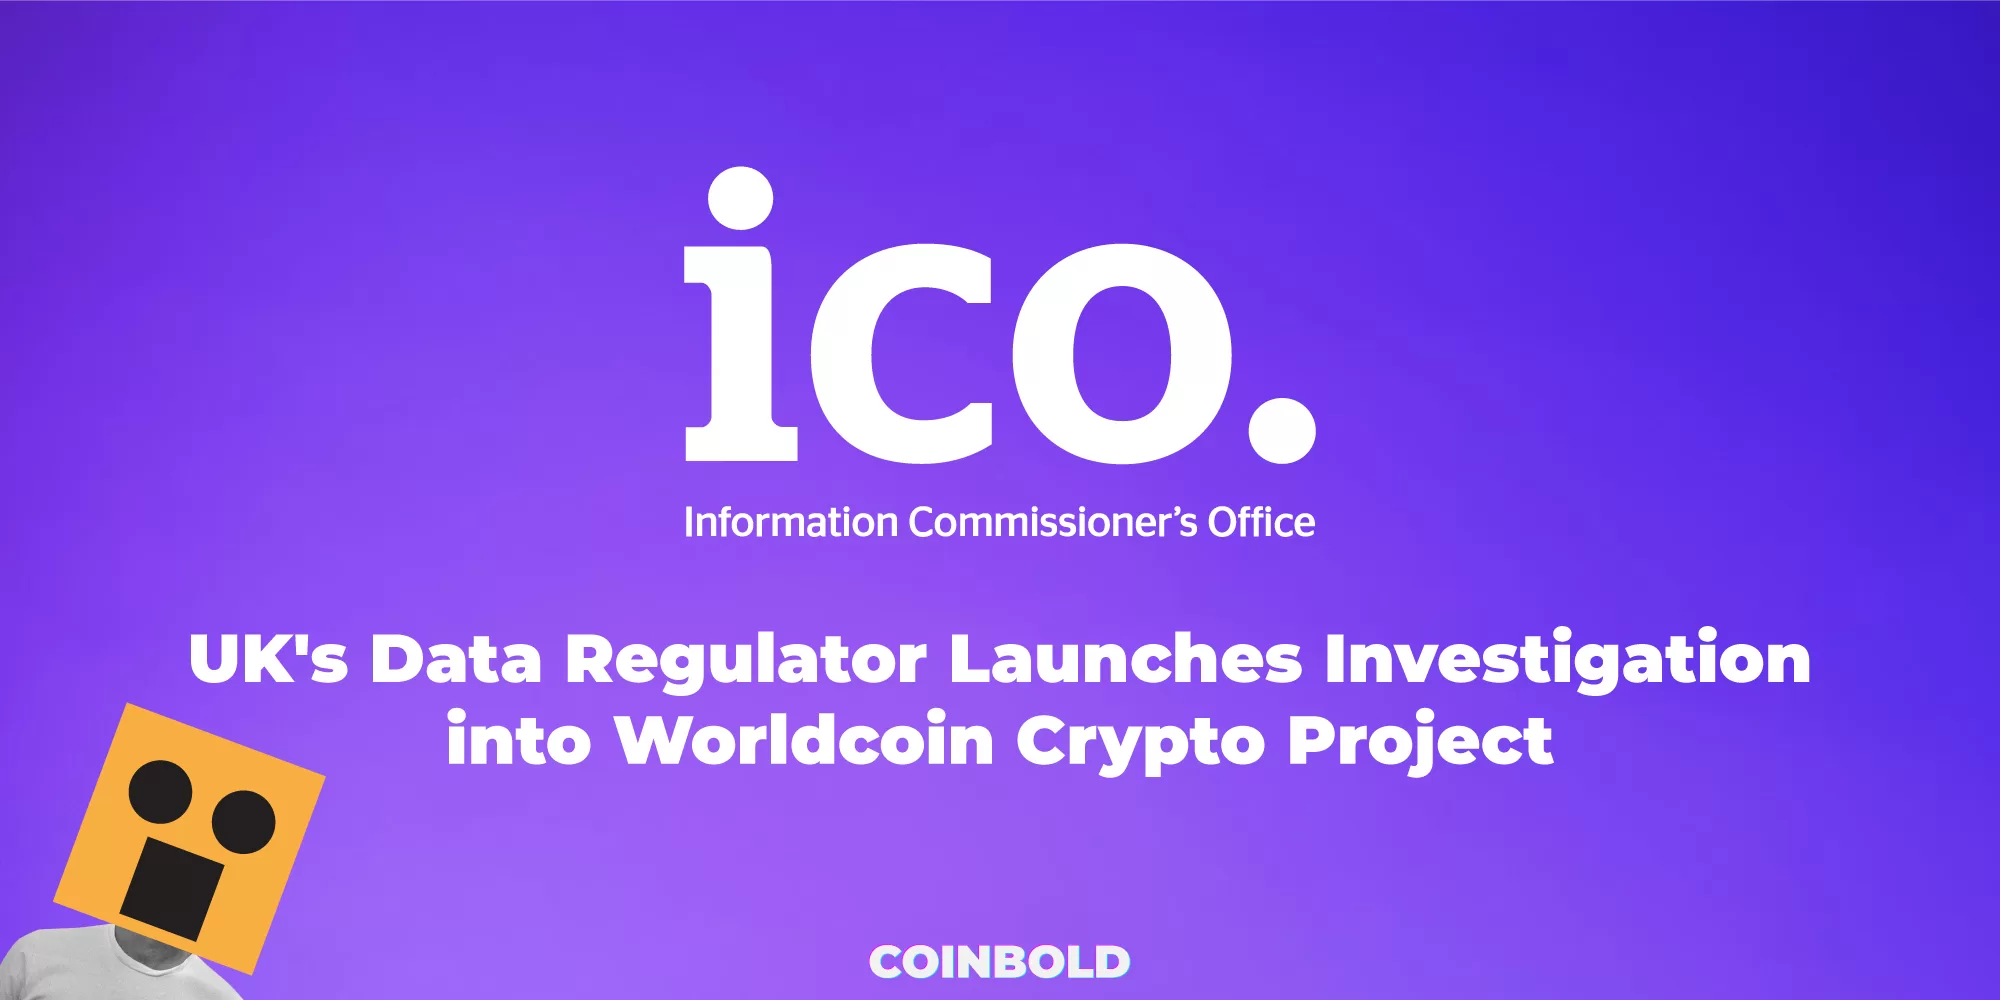 UK's Data Regulator Launches Investigation into Worldcoin Crypto Project